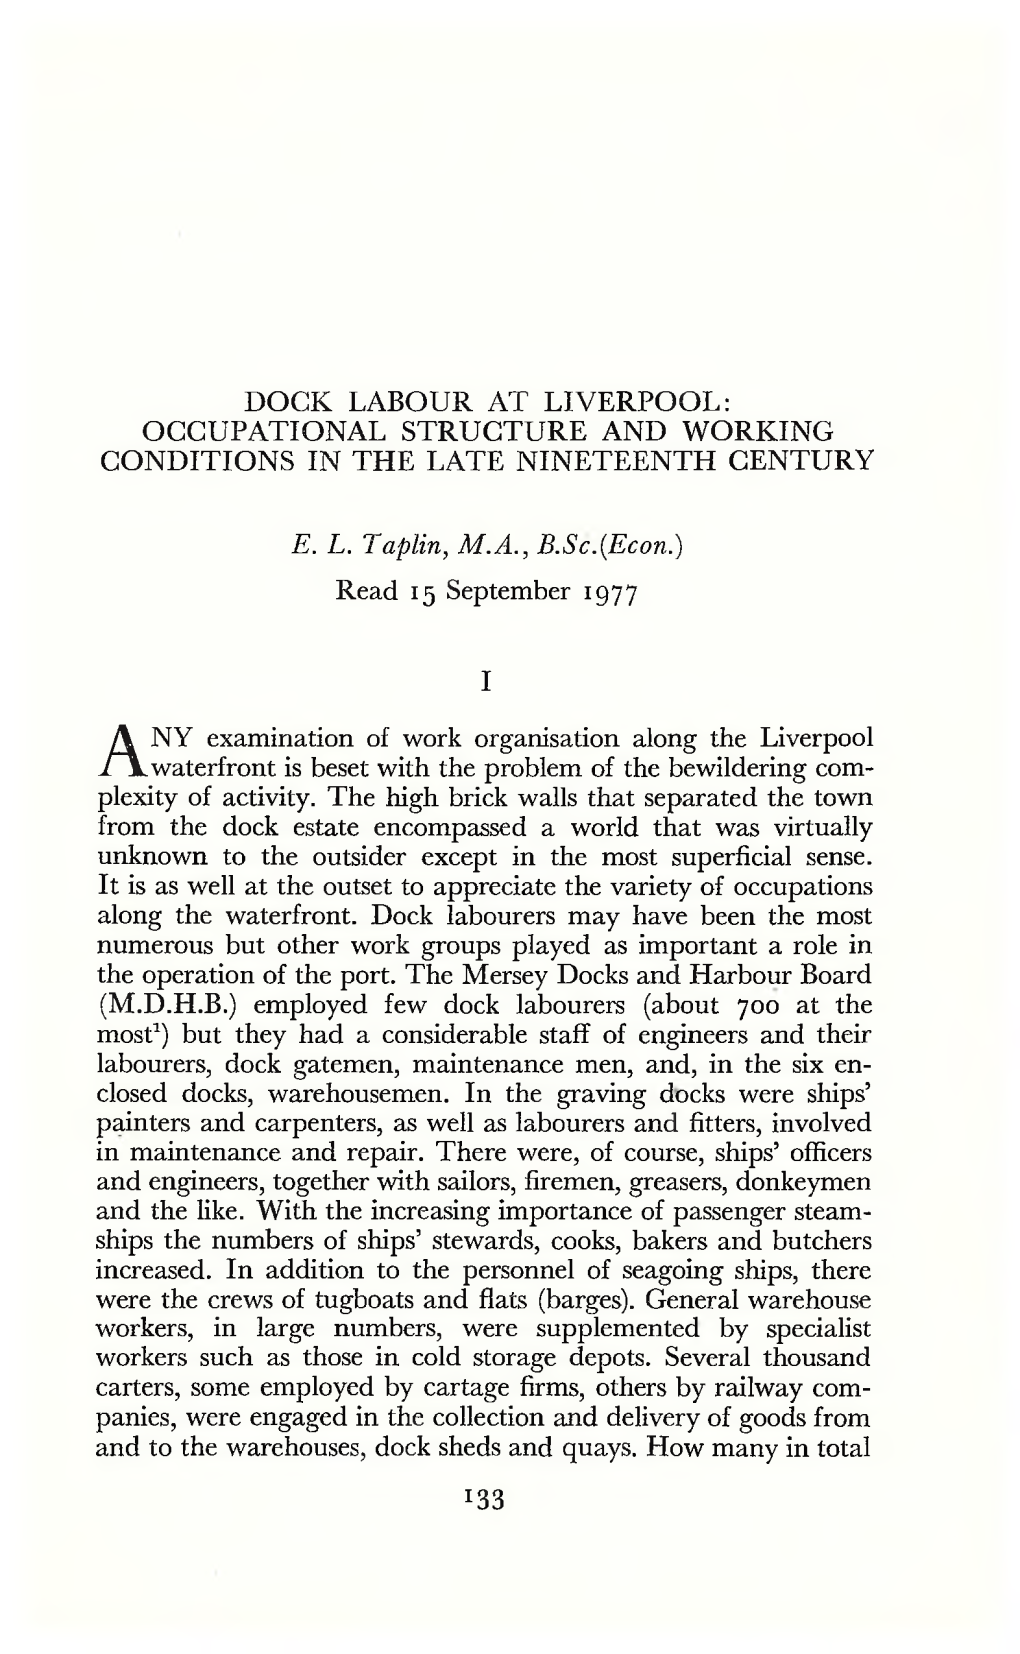 Dock Labour at Liverpool: Occupational Structure and Working Conditions in the Late Nineteenth Century